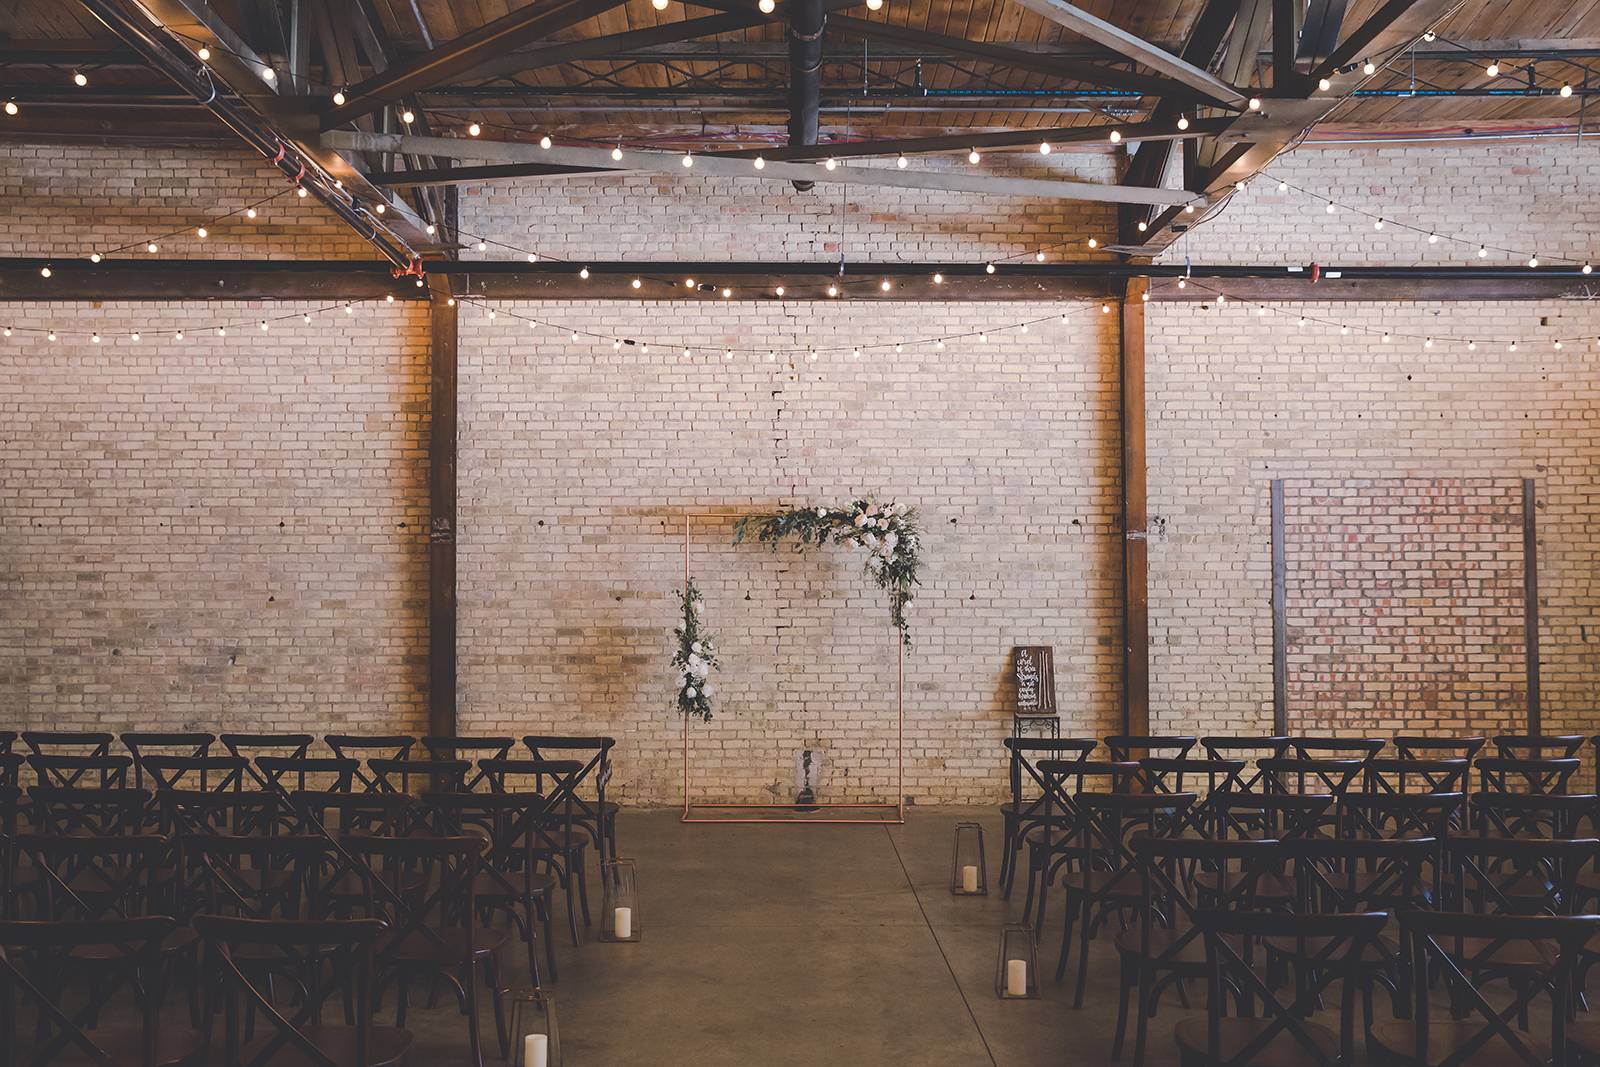 crossback chairs, ceremony, ceremony chairs, ceremony arch ideas, cafe lights, industrial chic cerem